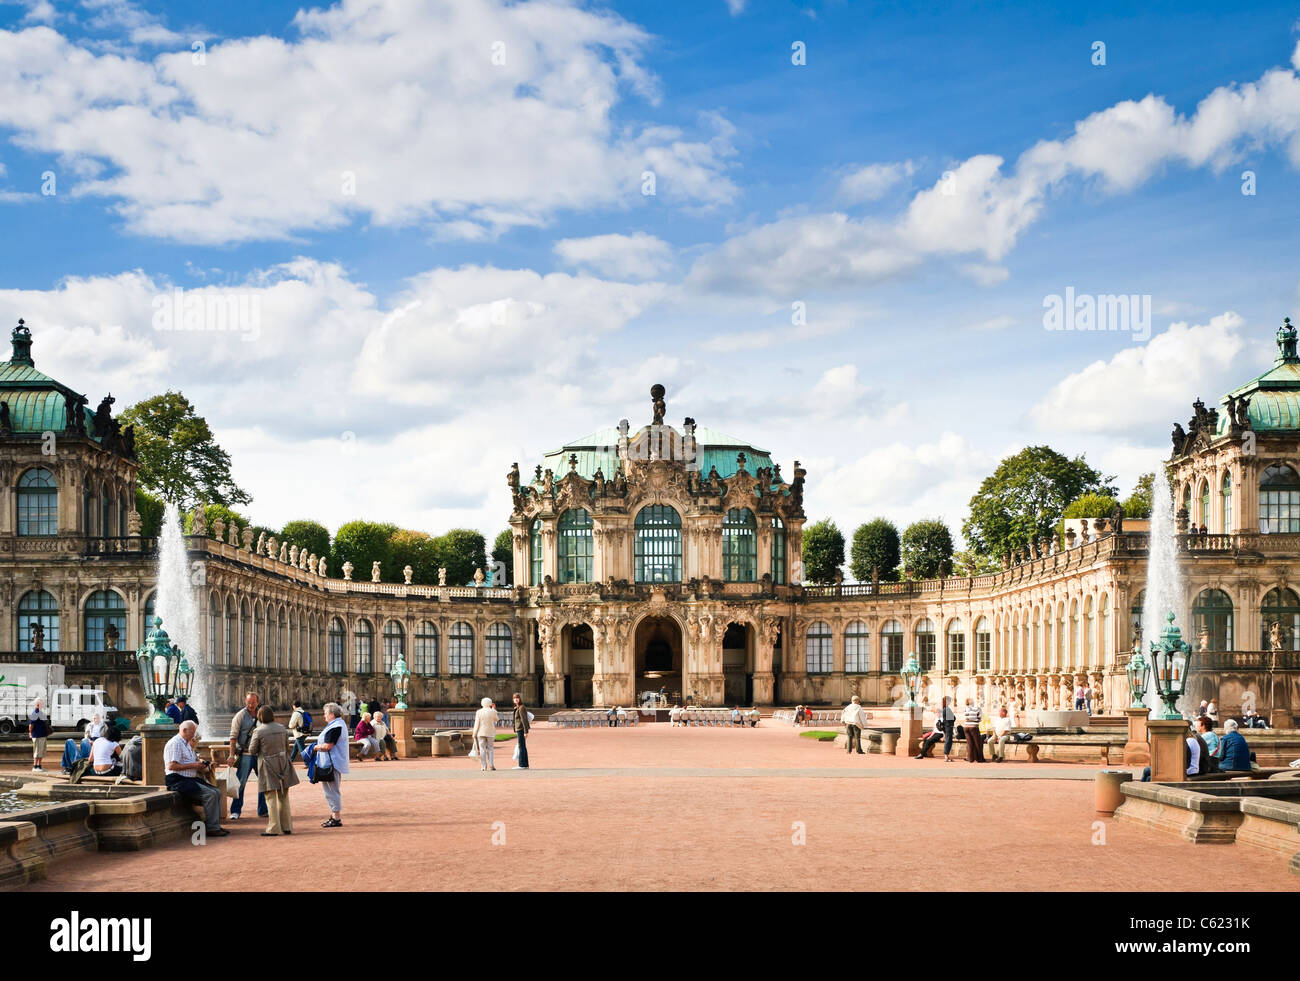 Tourists at the Zwinger Palace courtyard, Dresden, Germany Stock Photo